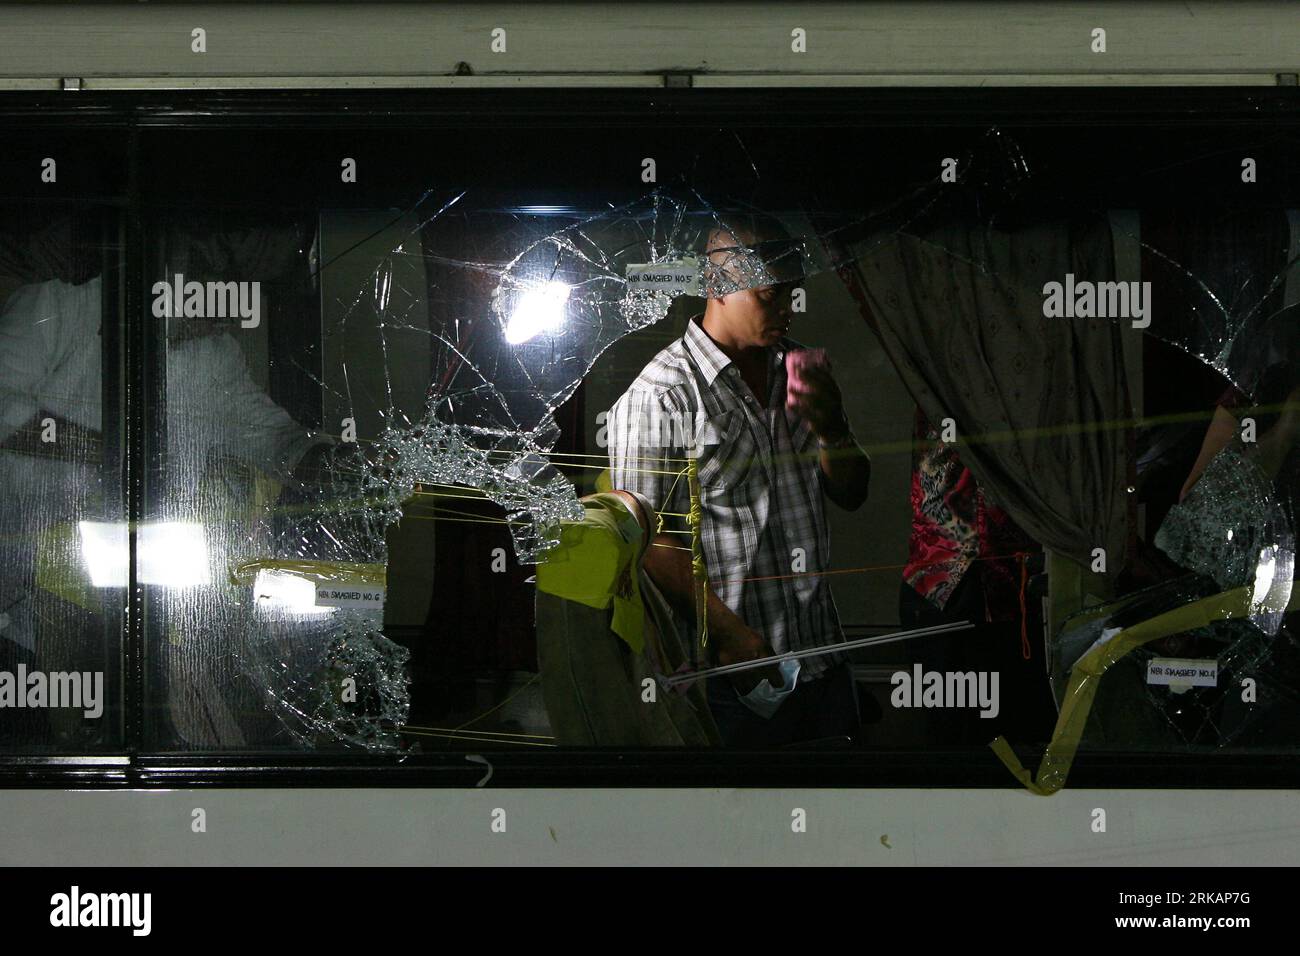 Bildnummer: 54411849  Datum: 08.09.2010  Copyright: imago/Xinhua 100908) -- MANILA, Sept. 8, 2010 (Xinhua) -- Alberto Lubang, the driver of the tourist bus, in which dismissed Policeman Rolando Mendoza held hostage on Aug. 23, wipes his face as he recounts the violent incident during an occular inspection with the members of the Incident Investigation and Review Committee(IIRC) inside the Ordnance Warehouse at the Camp Bagong Diwa in Taguig City, the Philippines Sept. 8, 2010. The IIRC held the inspection to investigate the hostage crisis that killed eight tourists of China s Hong Kong on Aug. Stock Photo